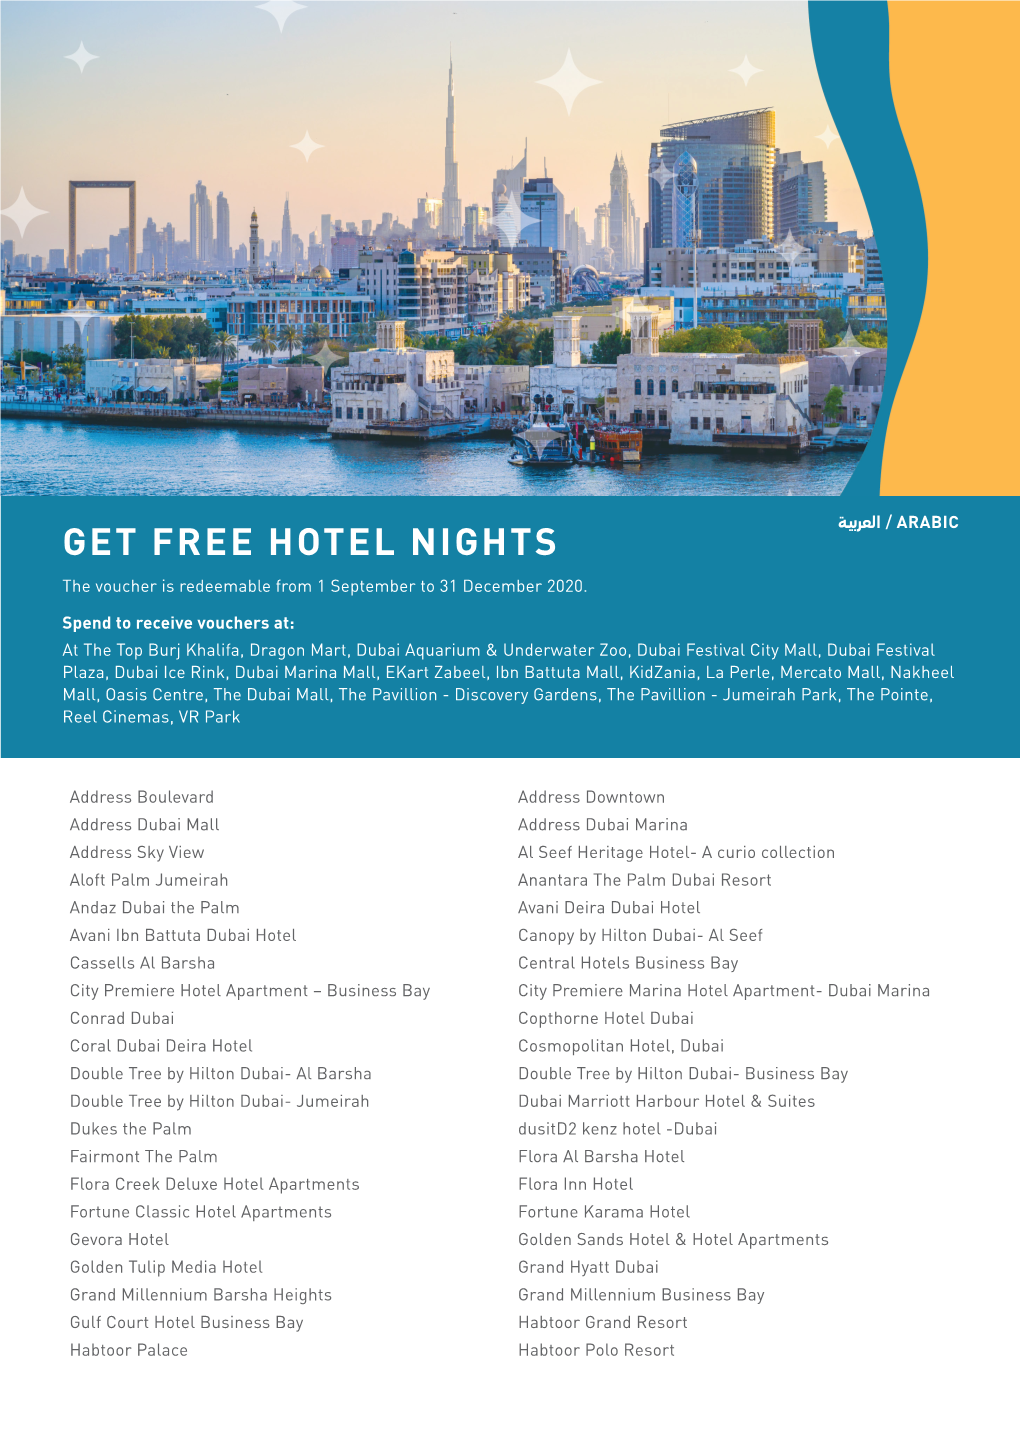 GET FREE HOTEL NIGHTS the Voucher Is Redeemable from 1 September to 31 December 2020